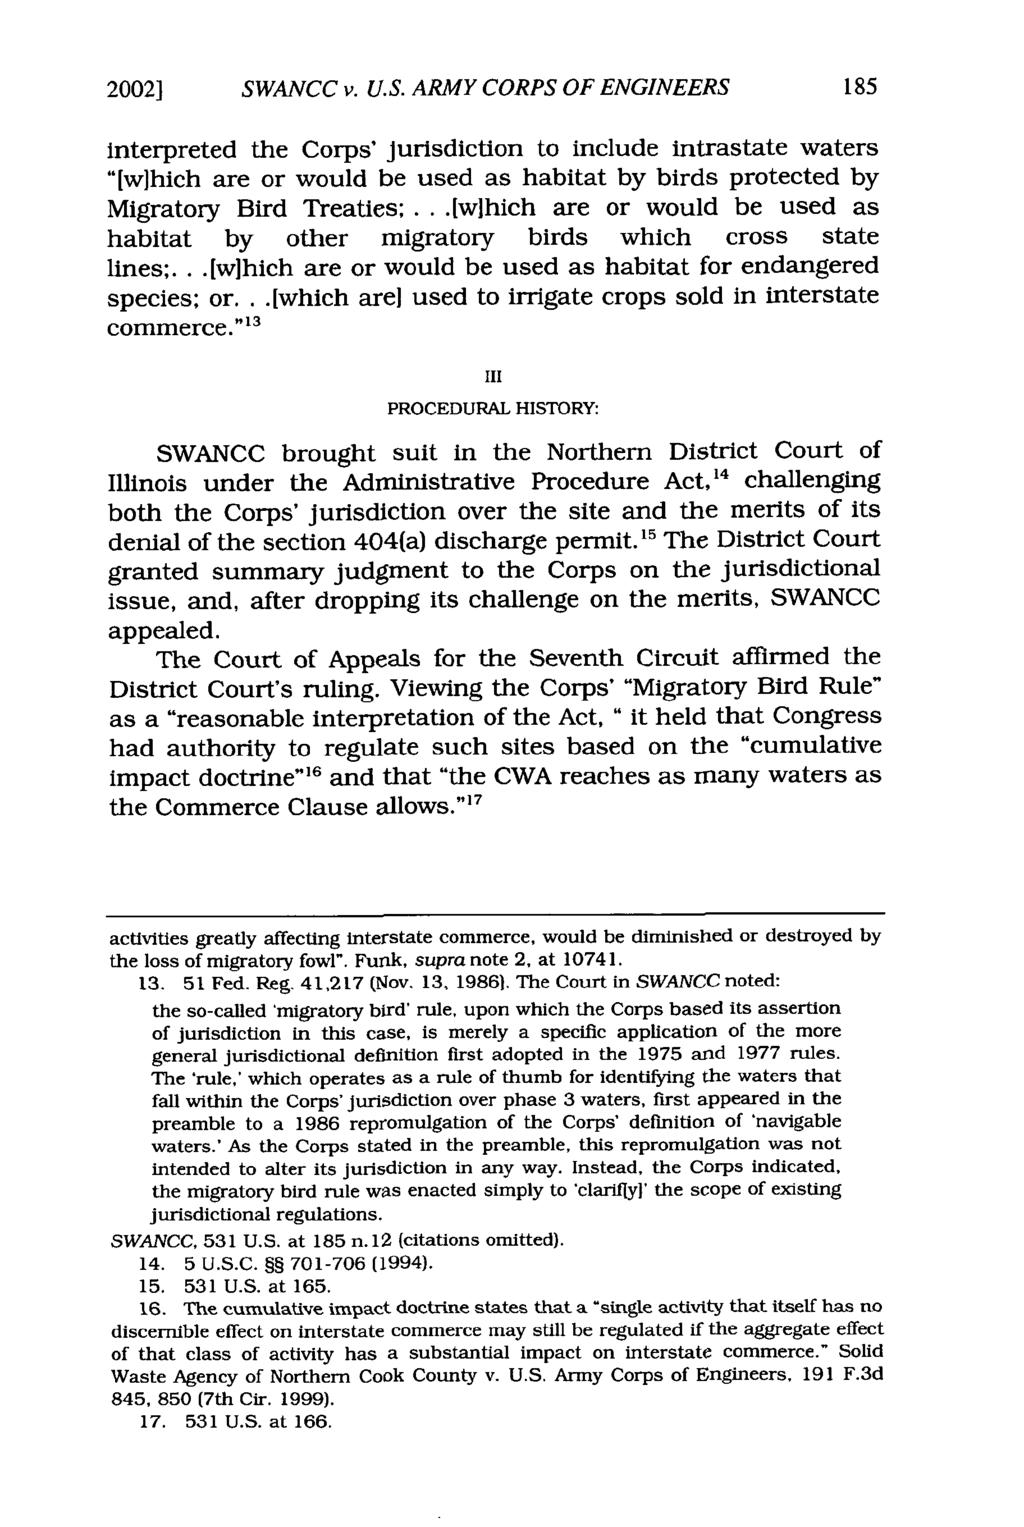 2002] SWANCC v. U.S. ARMY CORPS OF ENGINEERS interpreted the Corps' jurisdiction to include intrastate waters "[wlhich are or would be used as habitat by birds protected by Migratory Bird Treaties;.